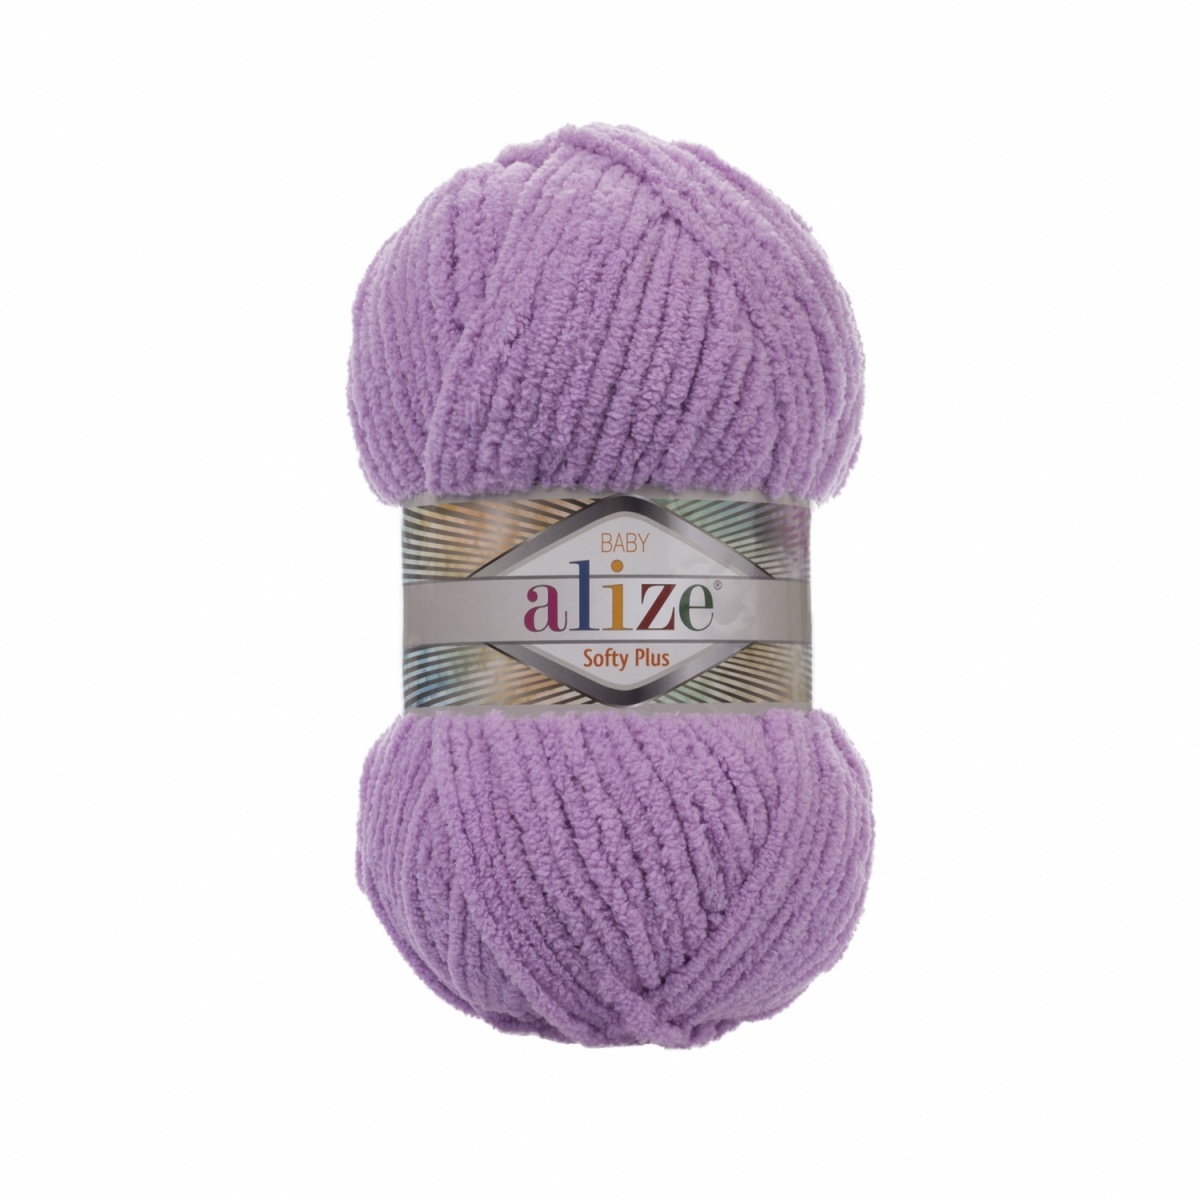 Alize Softy Plus, 100% Micropolyester 5 Skein Value Pack, 500g фото 1